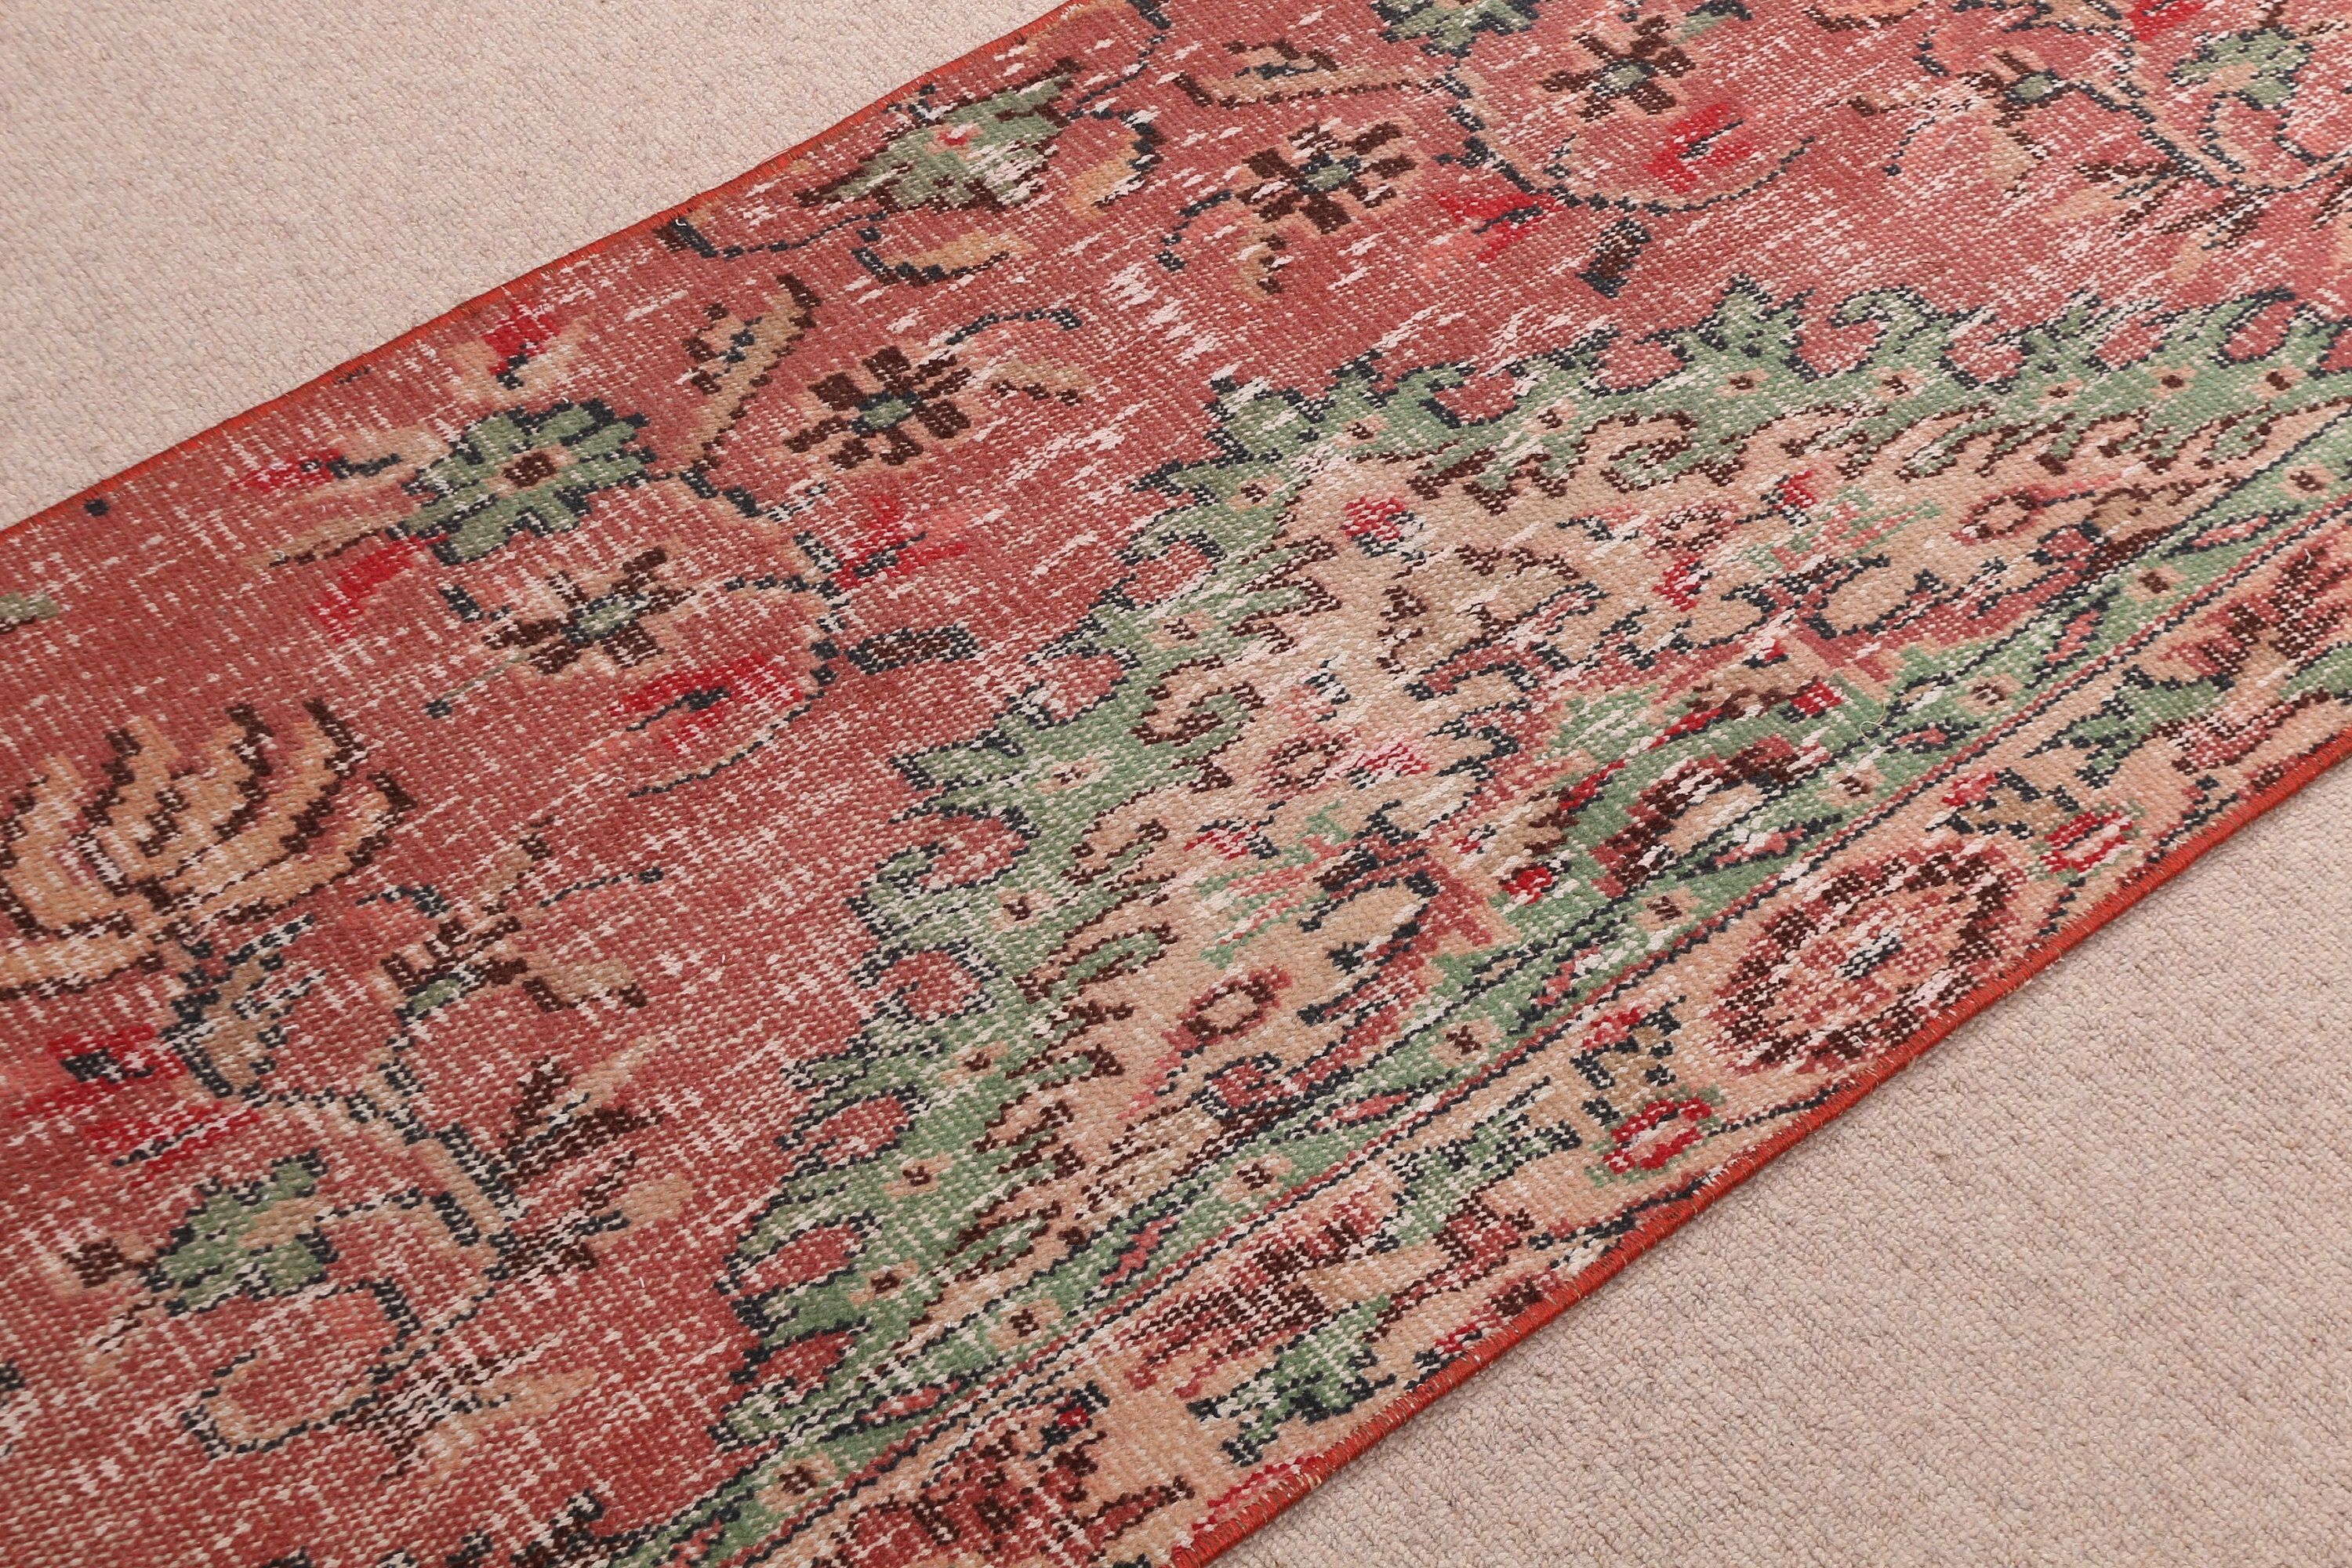 2x4.1 ft Small Rug, Turkish Rug, Bath Rug, Antique Rugs, Entry Rugs, Pink Floor Rug, Vintage Rugs, Muted Rug, Rugs for Bath, Kitchen Rug